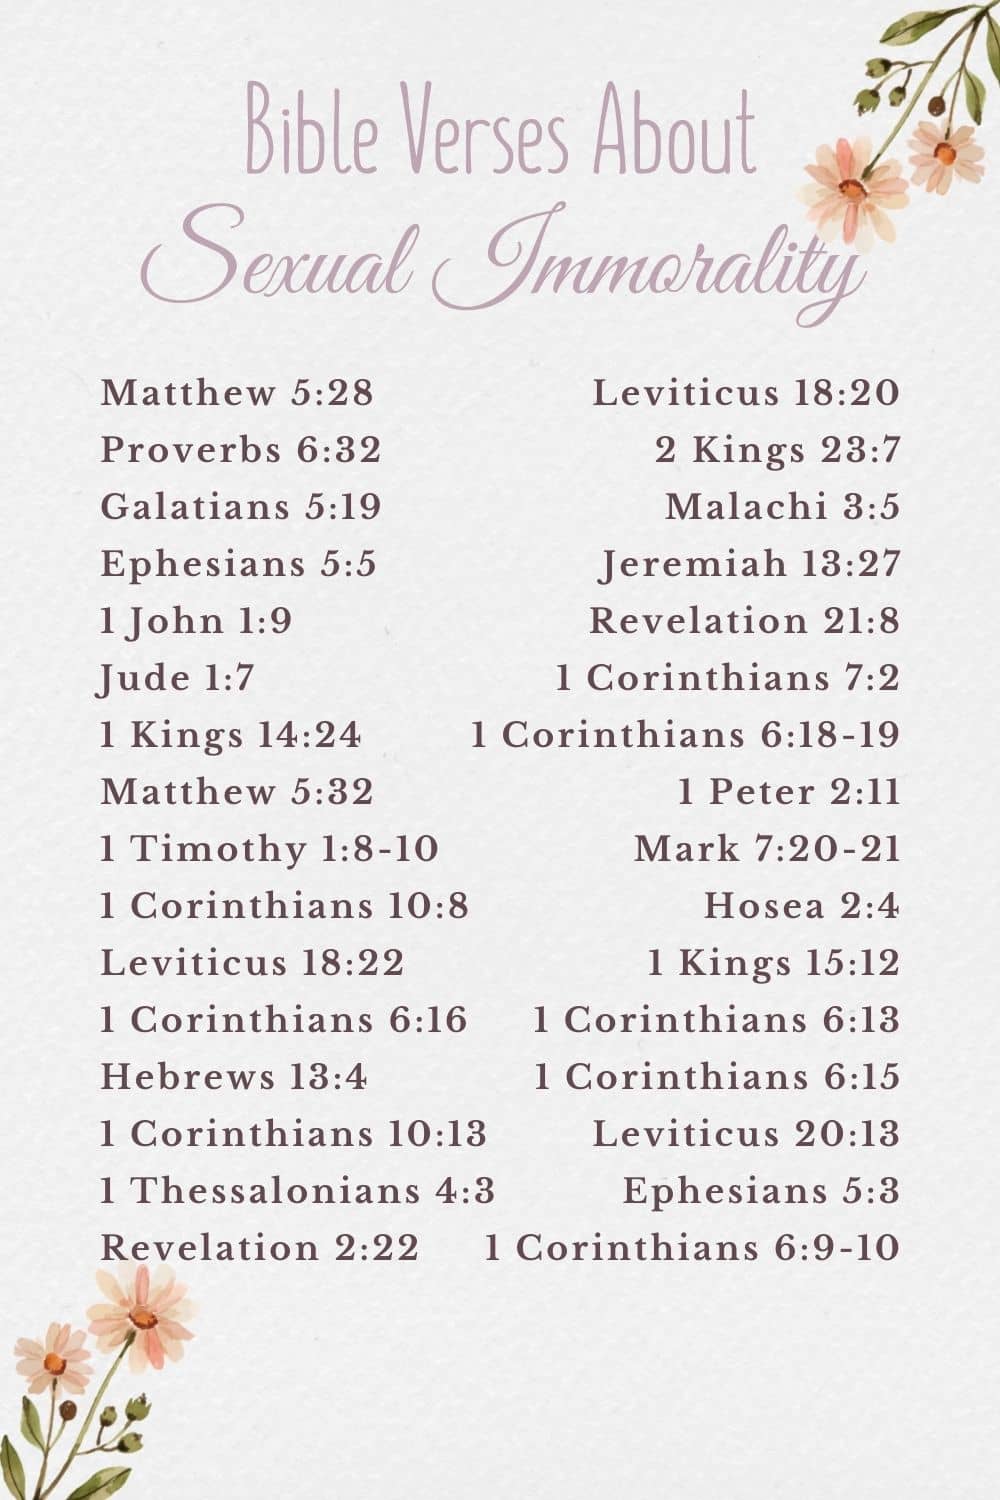 Bible Verses About Sexual Immorality
Bible Verses About Sexual purity